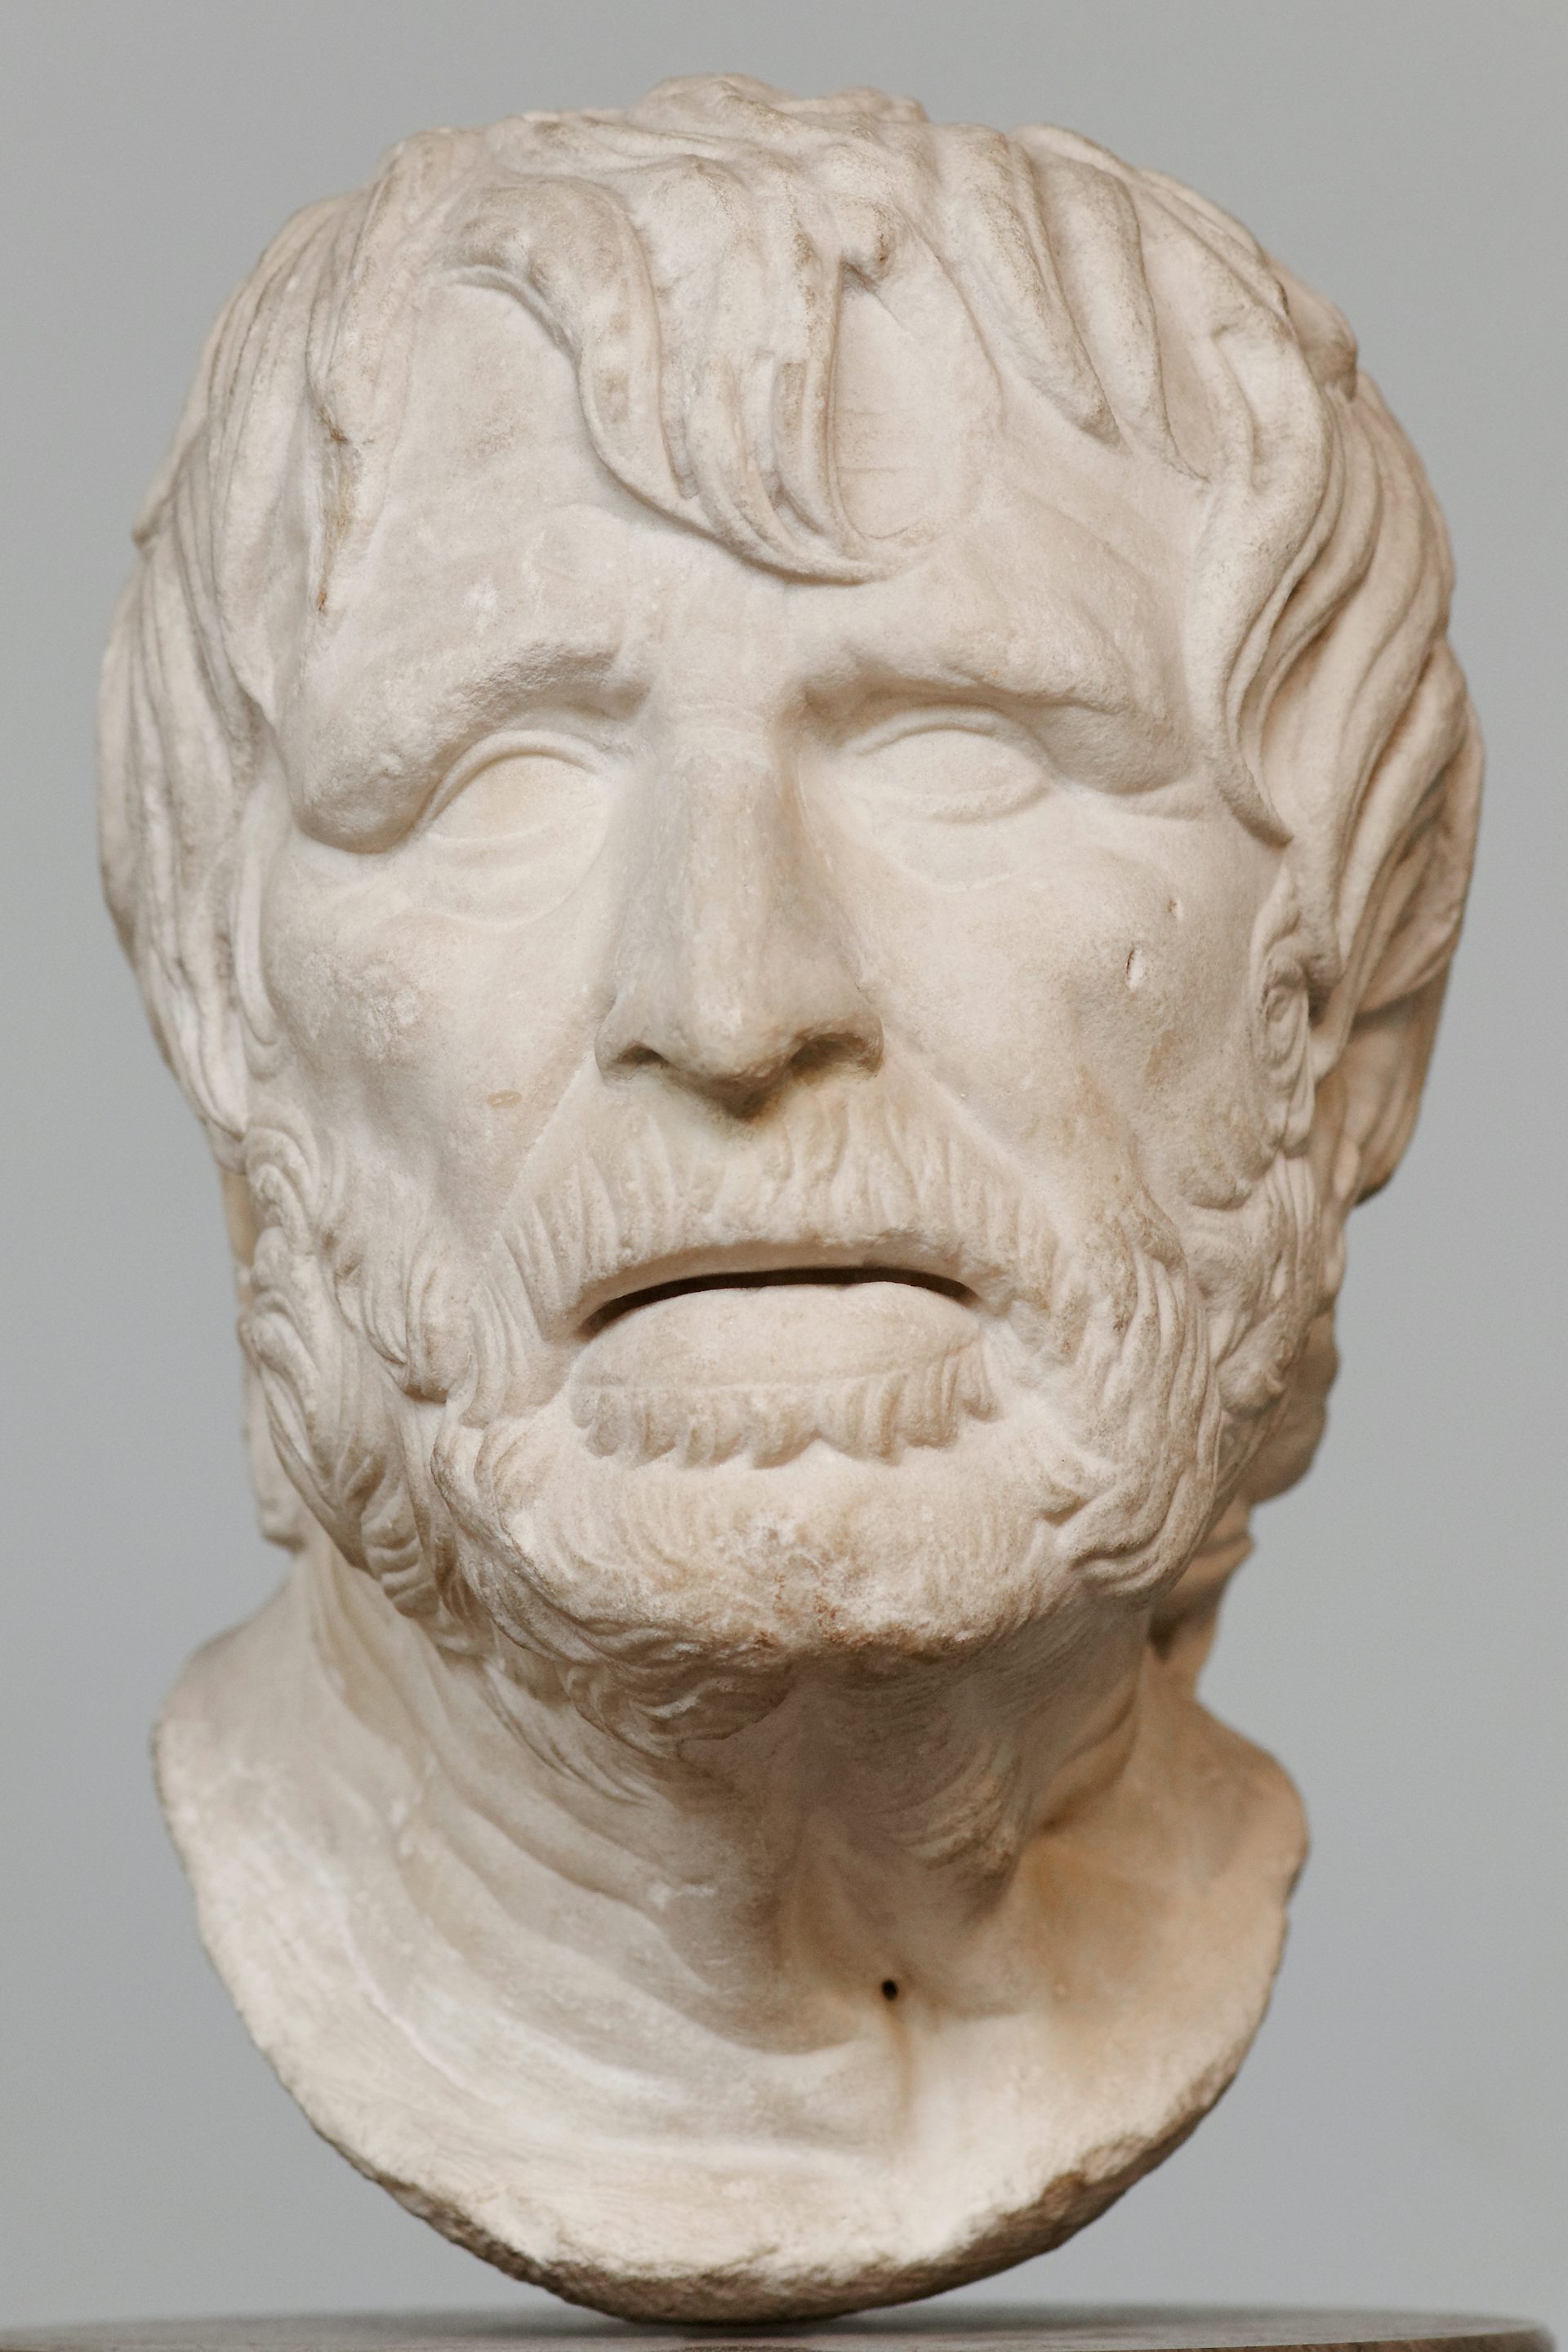 The “Pseudo-Seneca,” probably a portrait bust of Hesiod